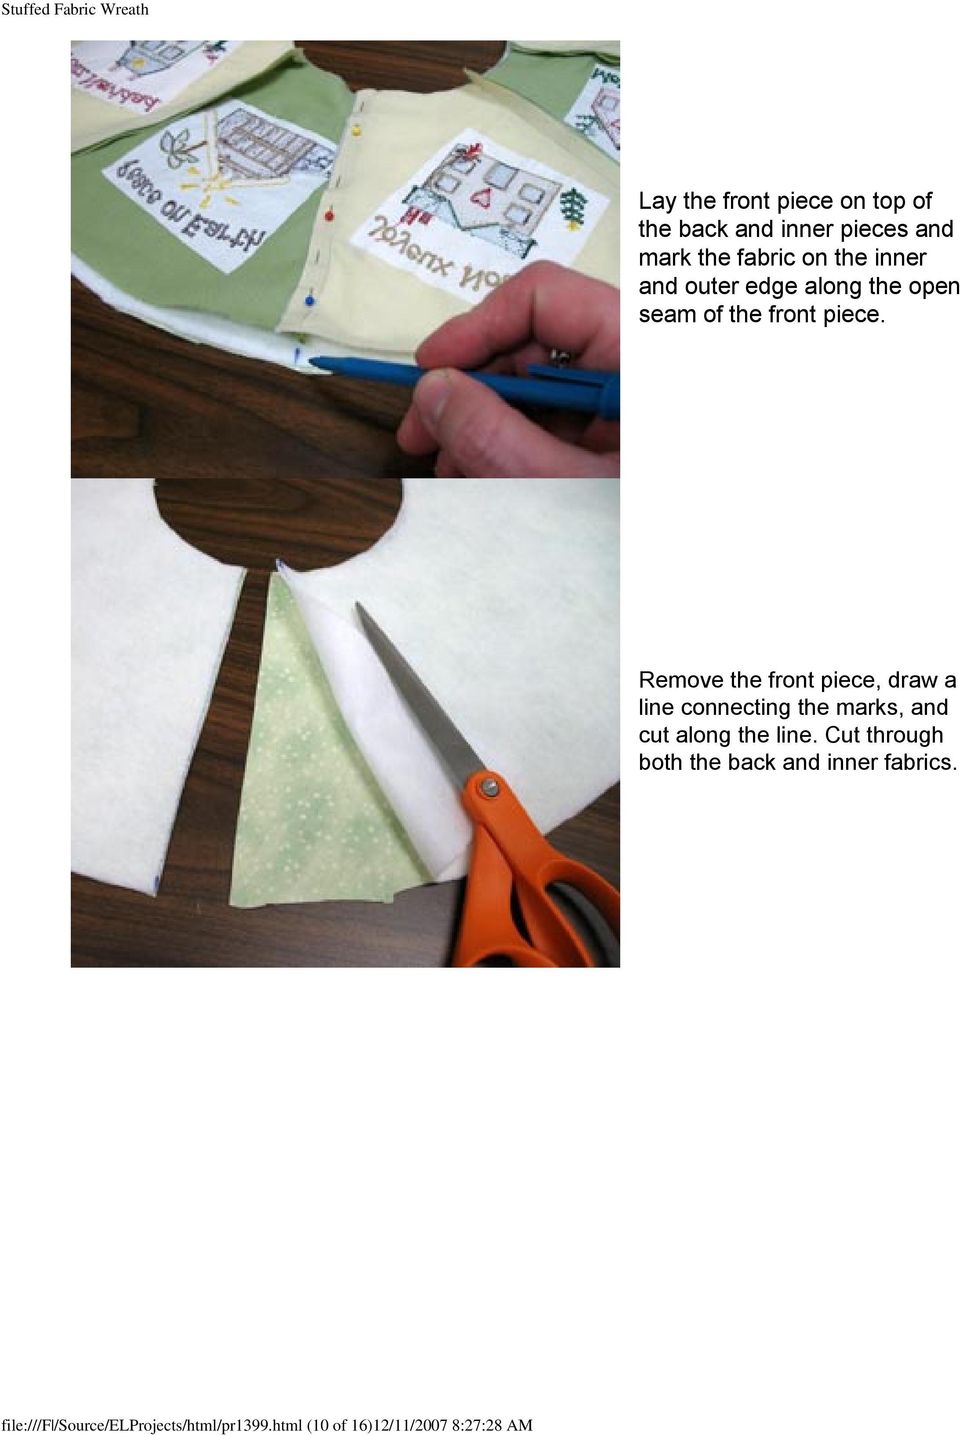 Remove the front piece, draw a line connecting the marks, and cut along the line.